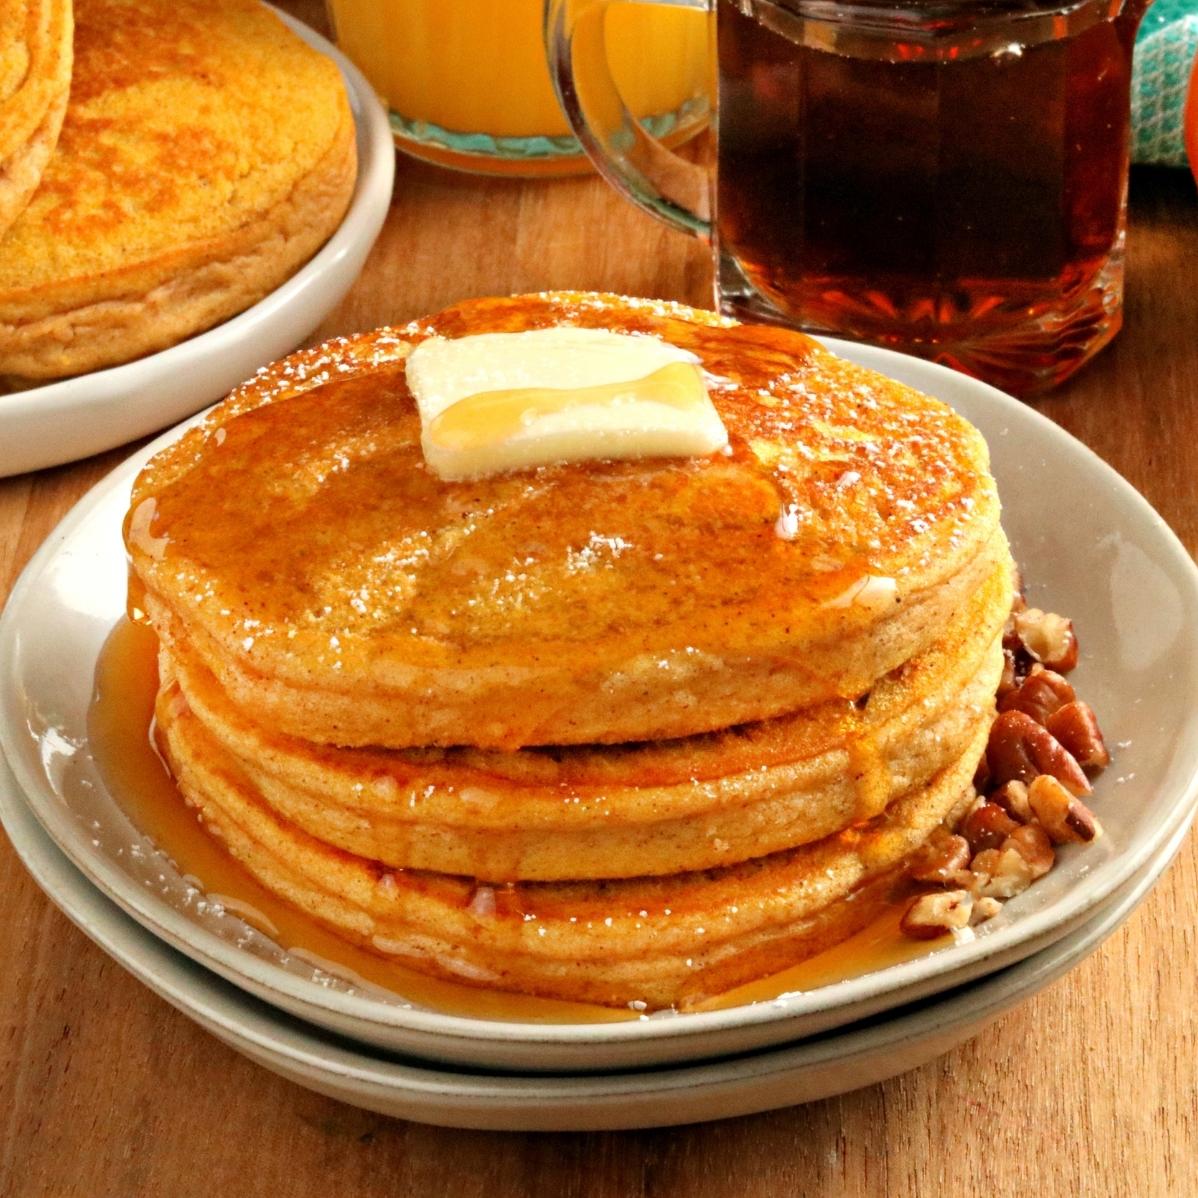  Fluffy pancakes that will make you fall in love with autumn.